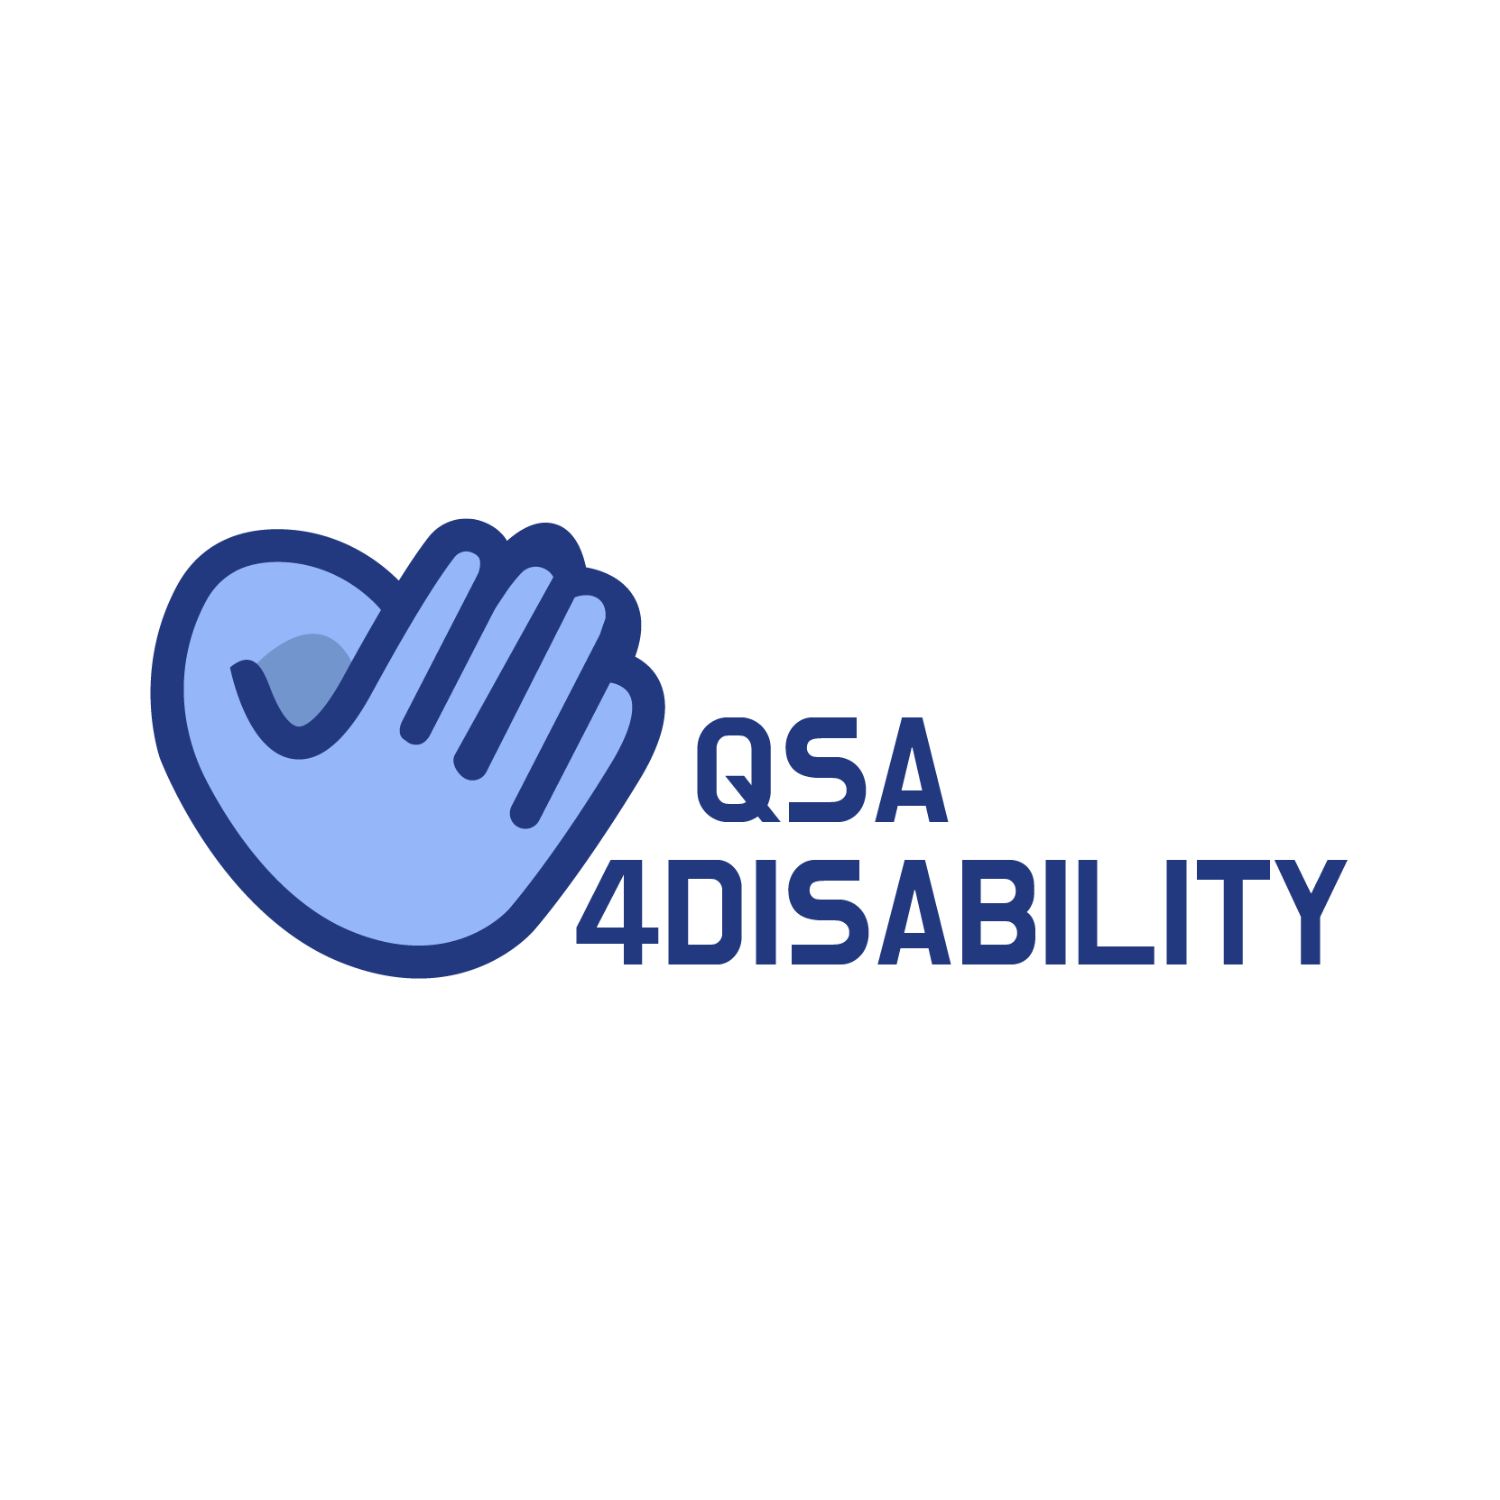 QSA4Disability - Setting a new standard for distance learning apprenticeships for people with disabilities